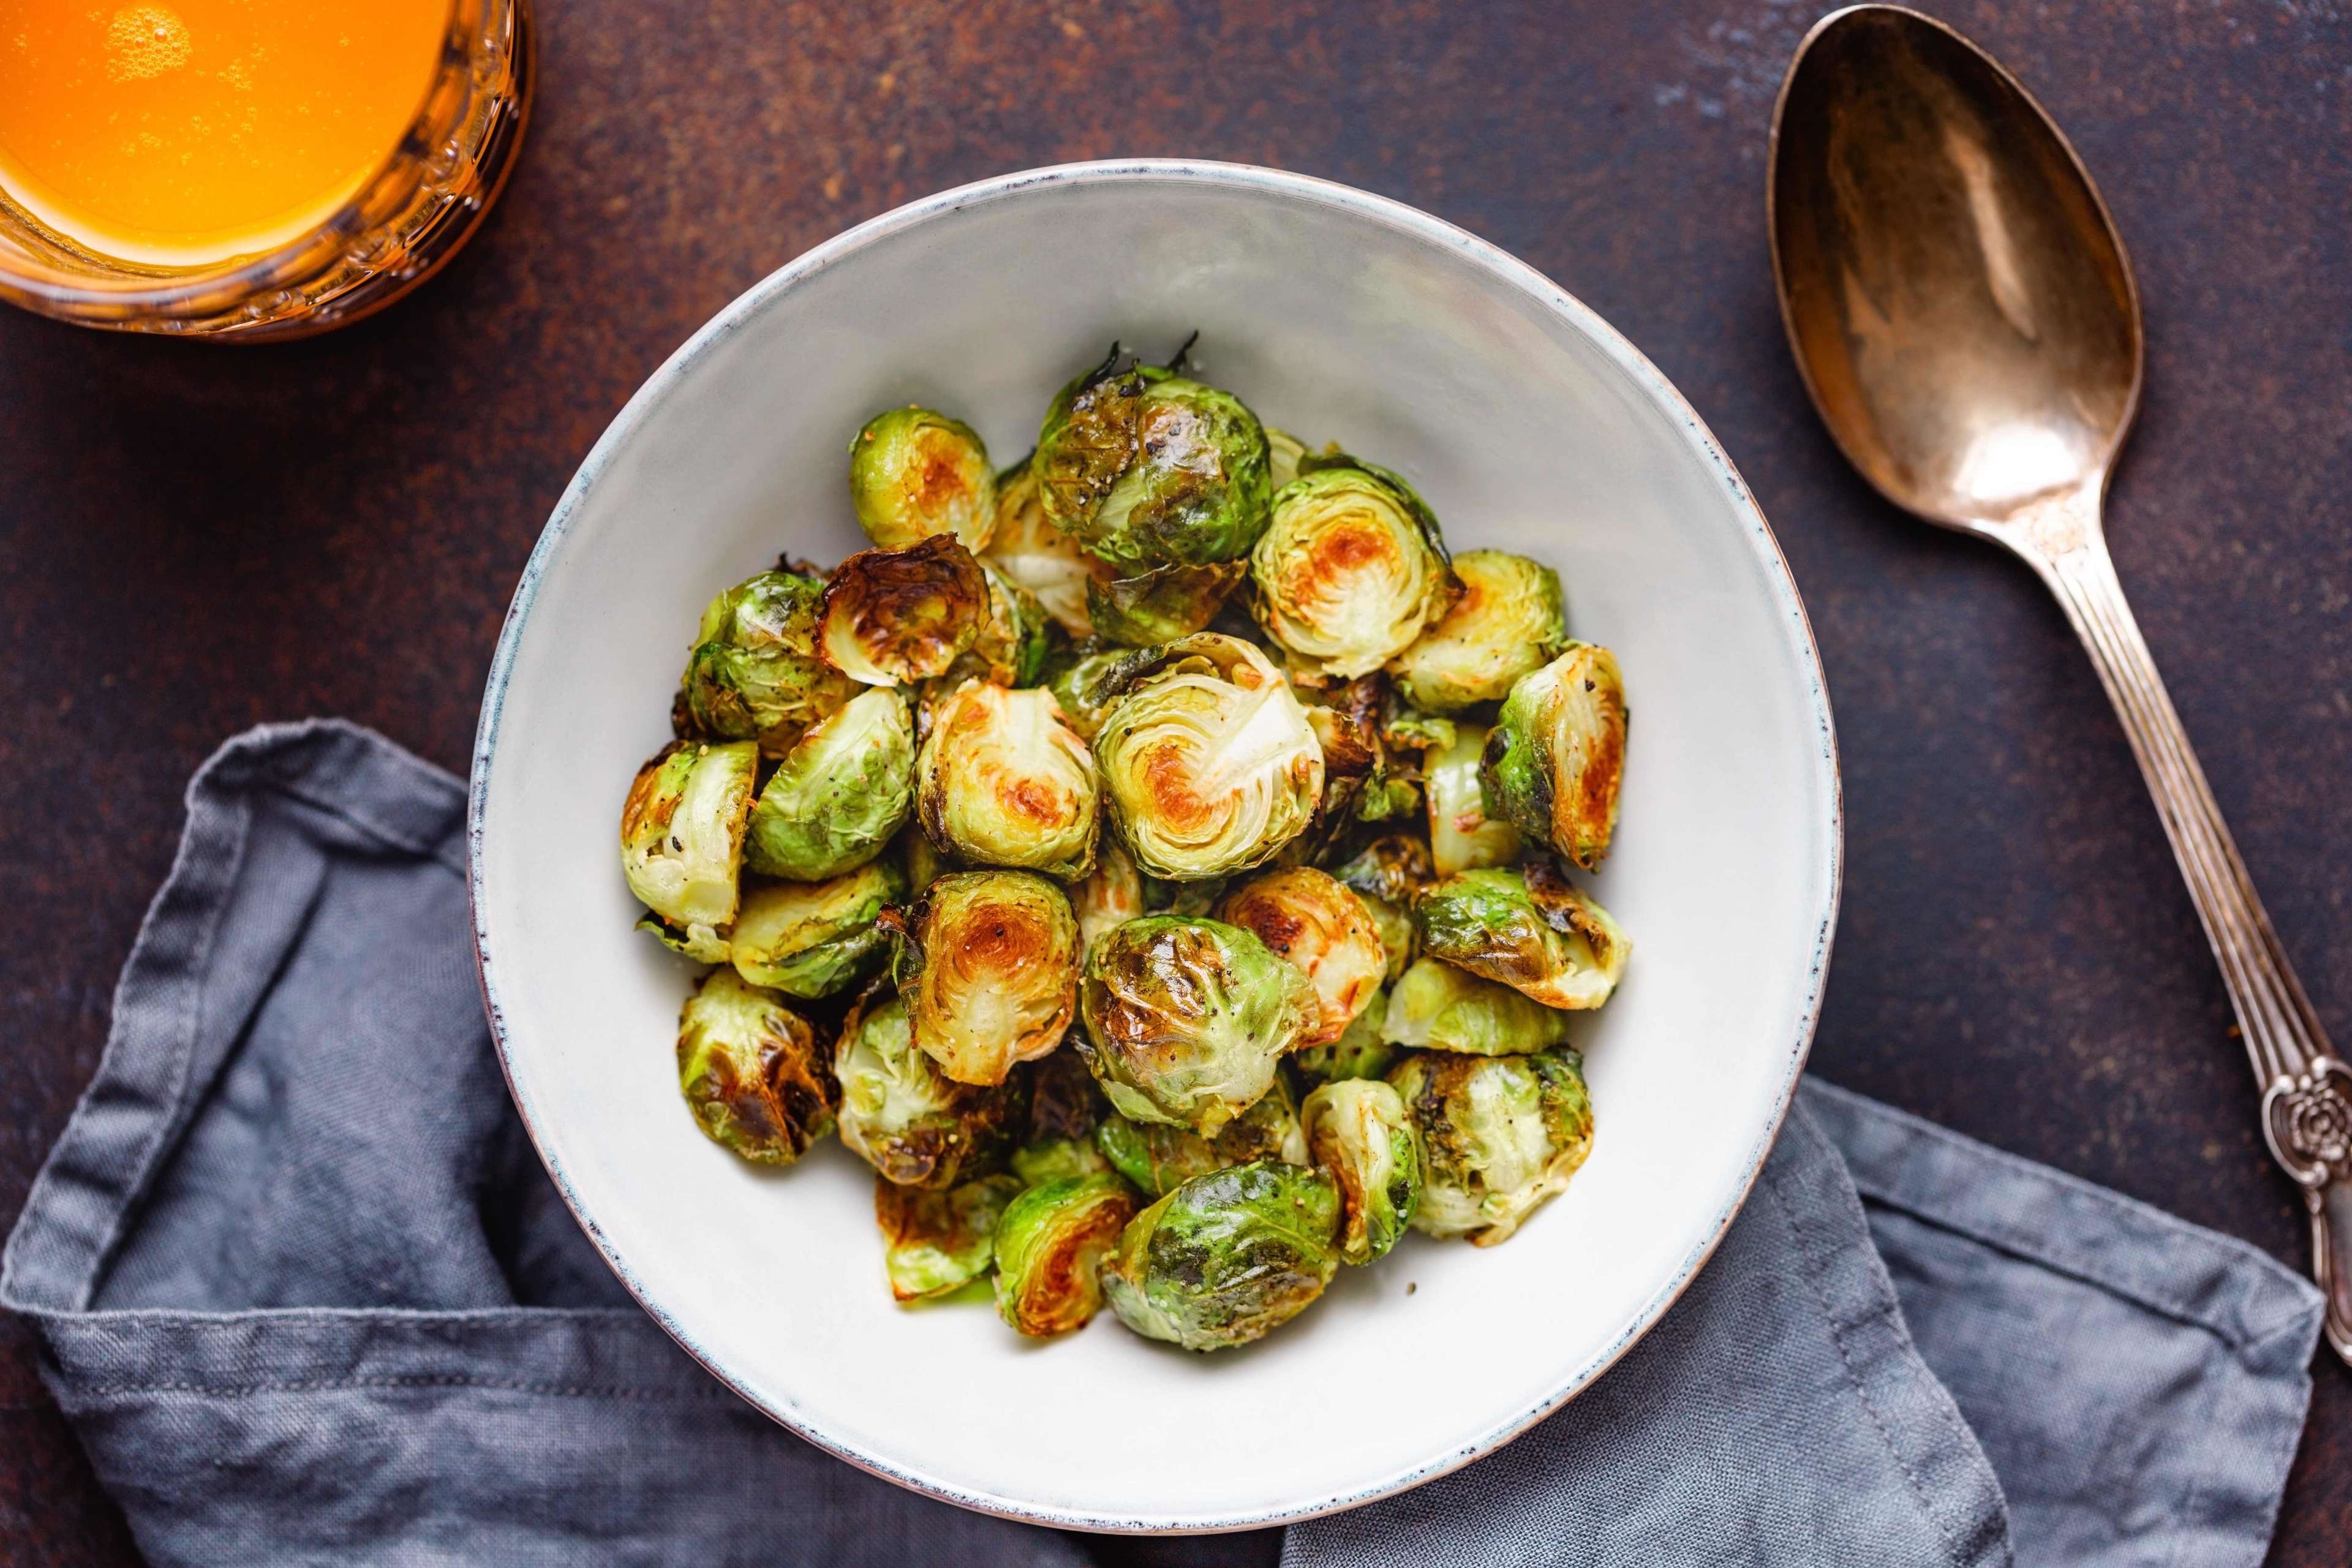 61a90cd0514ab2064935a2d9_roasted%20brussel%20sprouts.jpeg